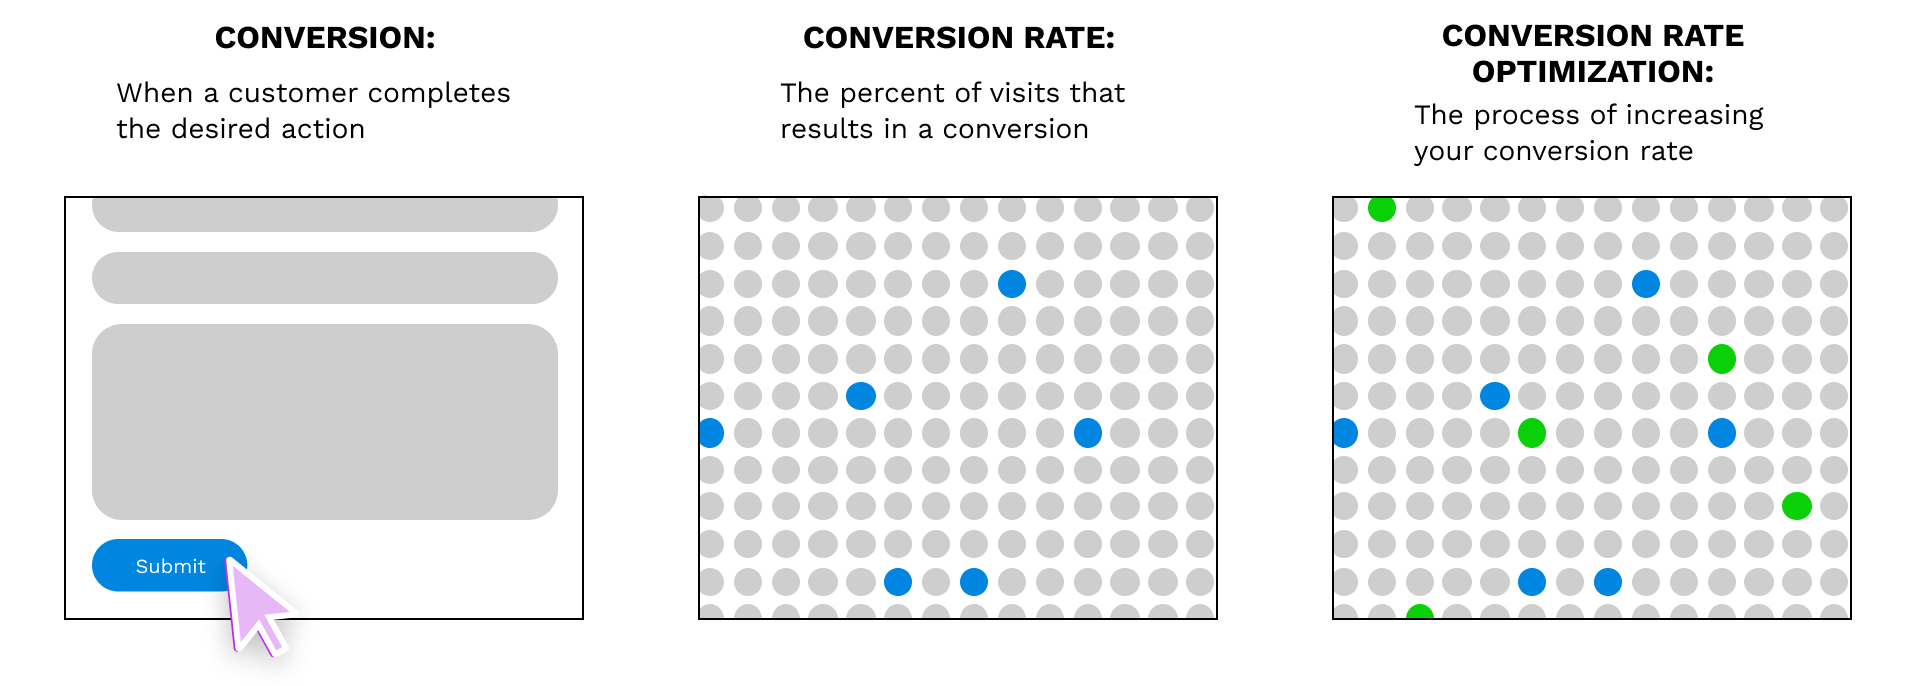 Conversion Rate explained